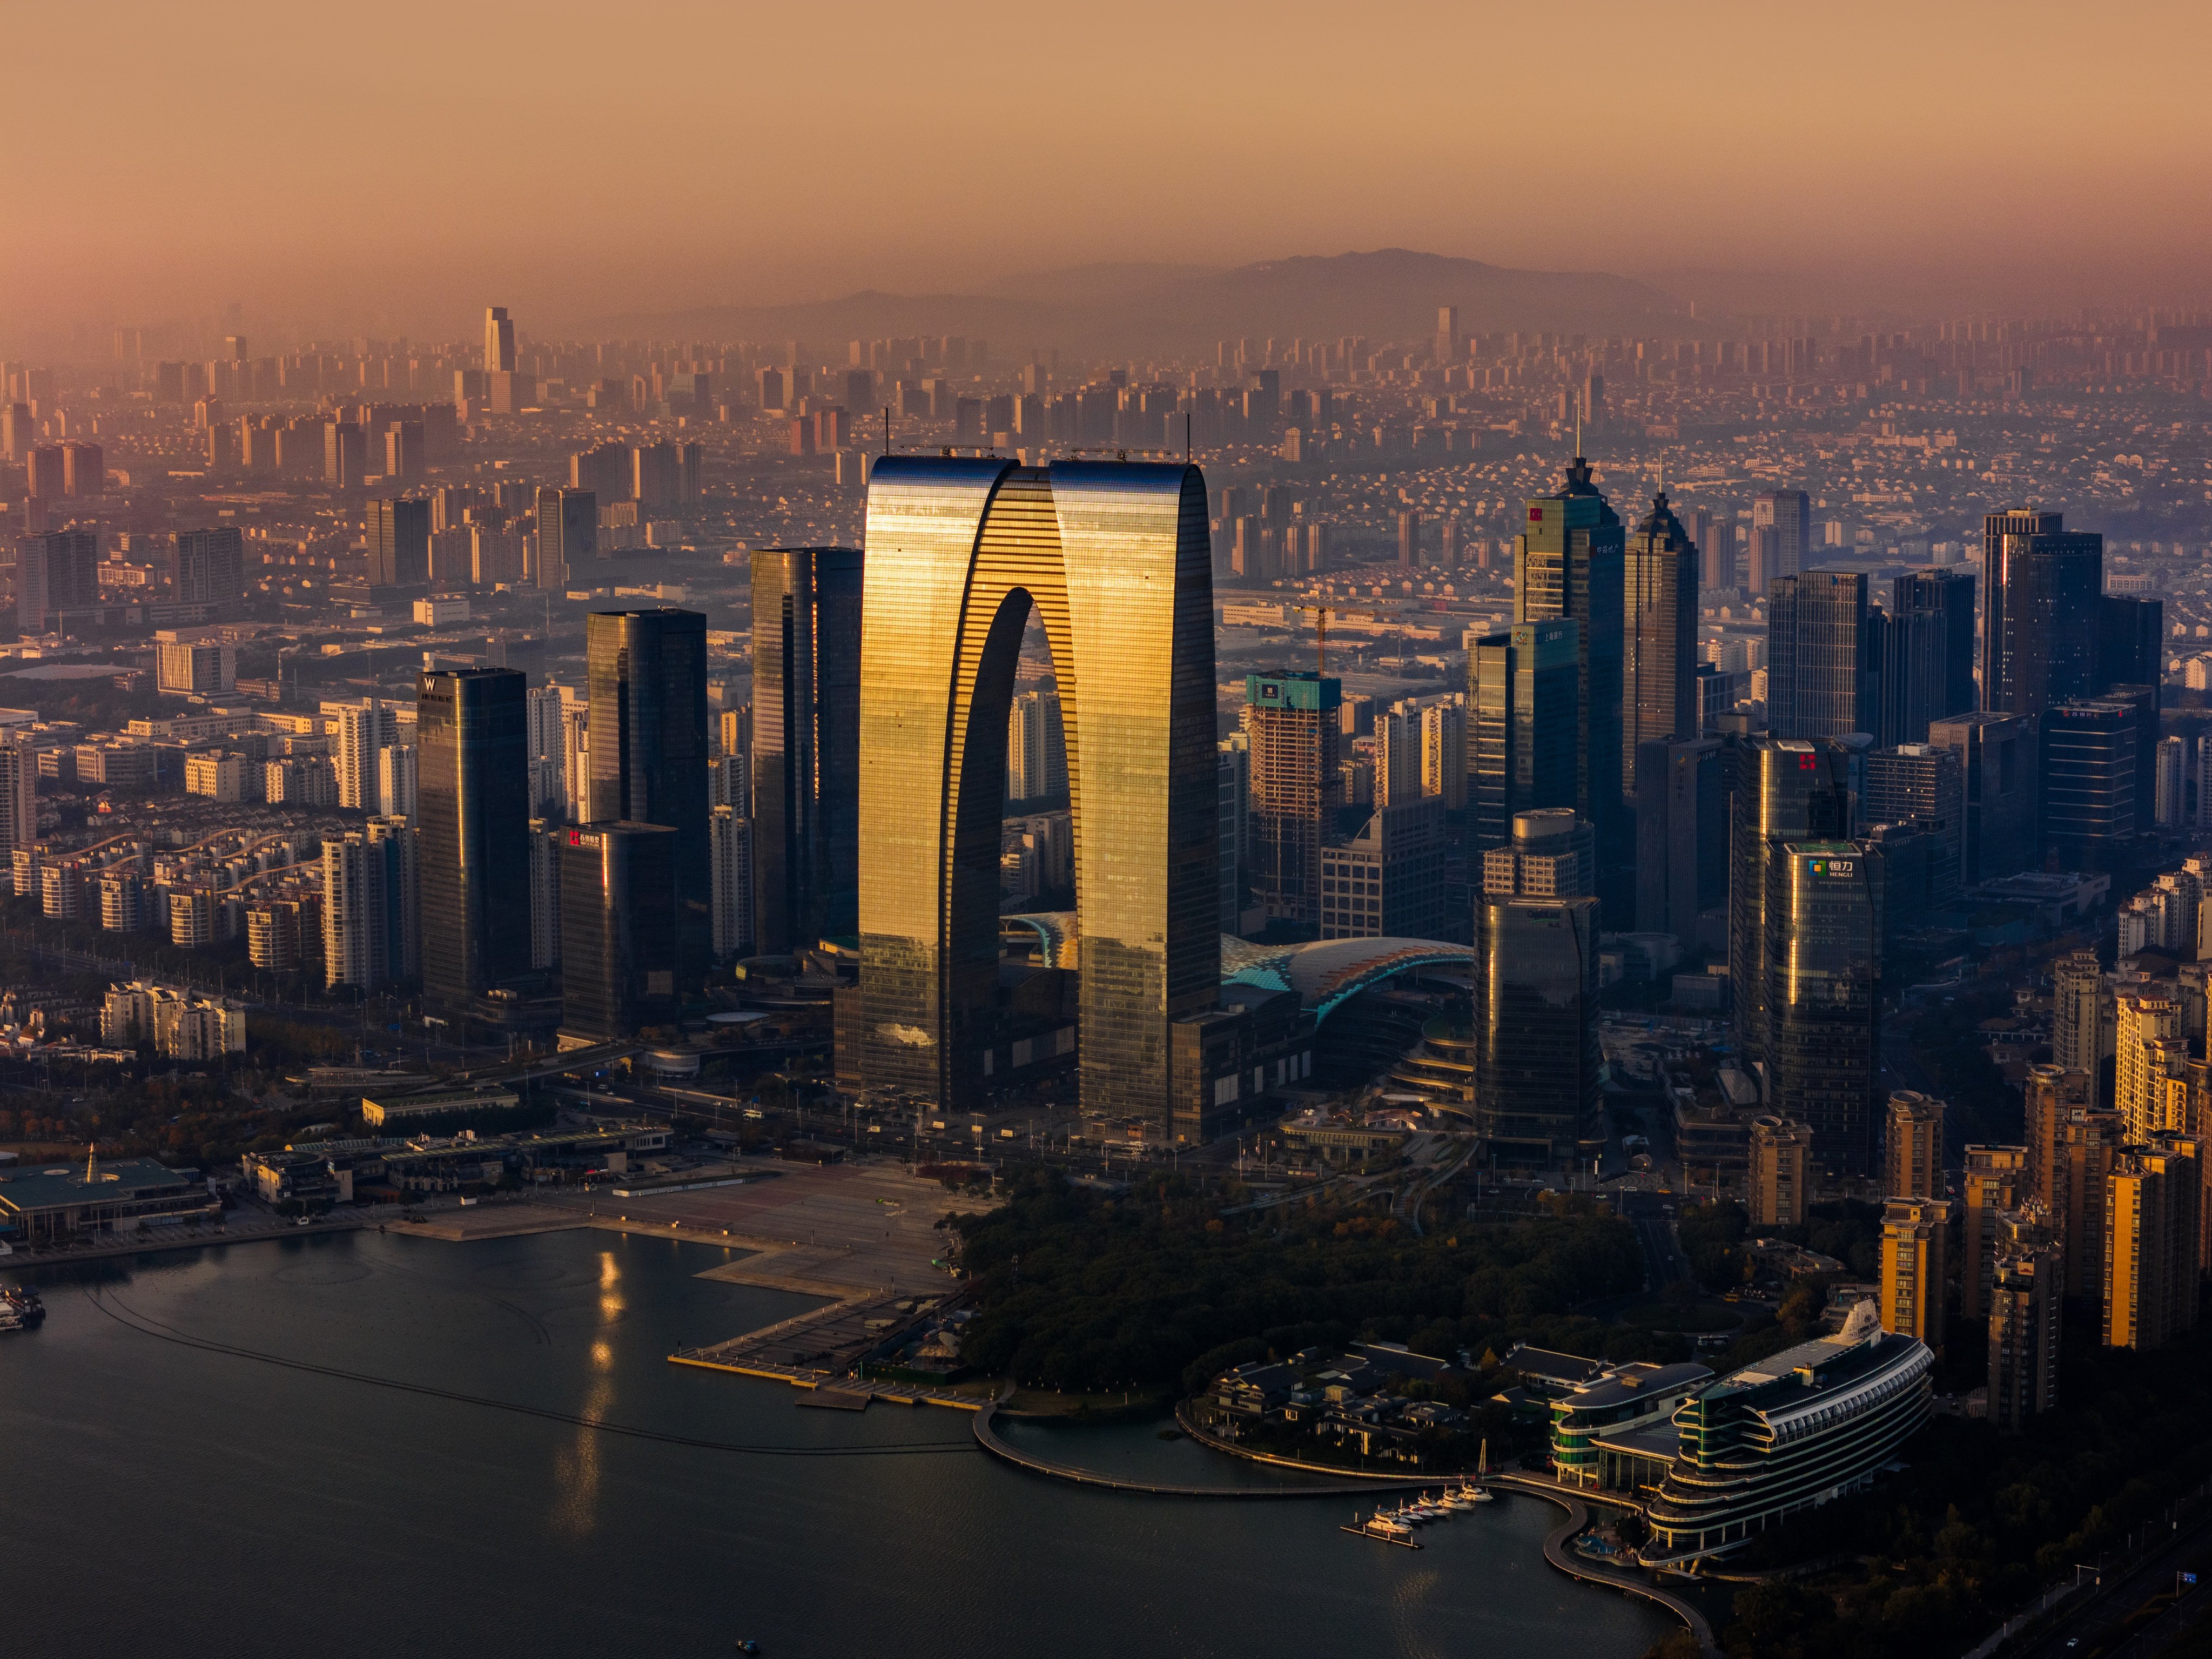 The sunrise over Suzhou Industrial Park. Photo: Getty Images